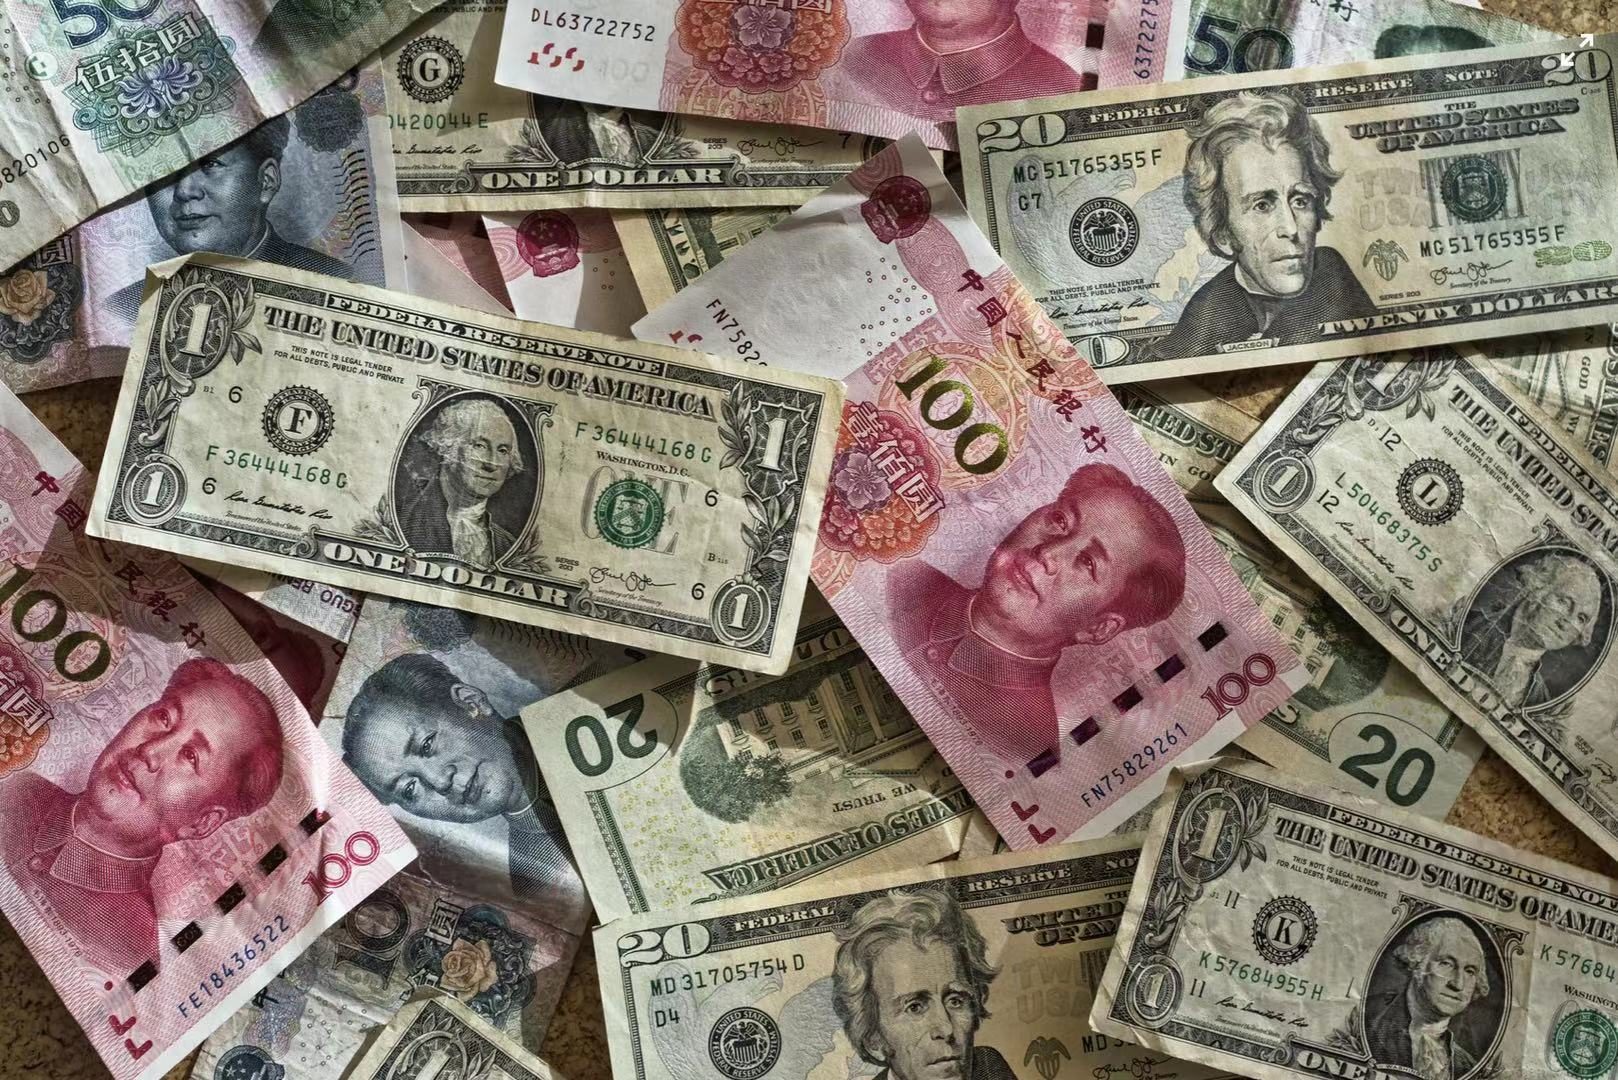 Chinese fintech Yincheng raises $76m Series C round led by GL Ventures, DCM